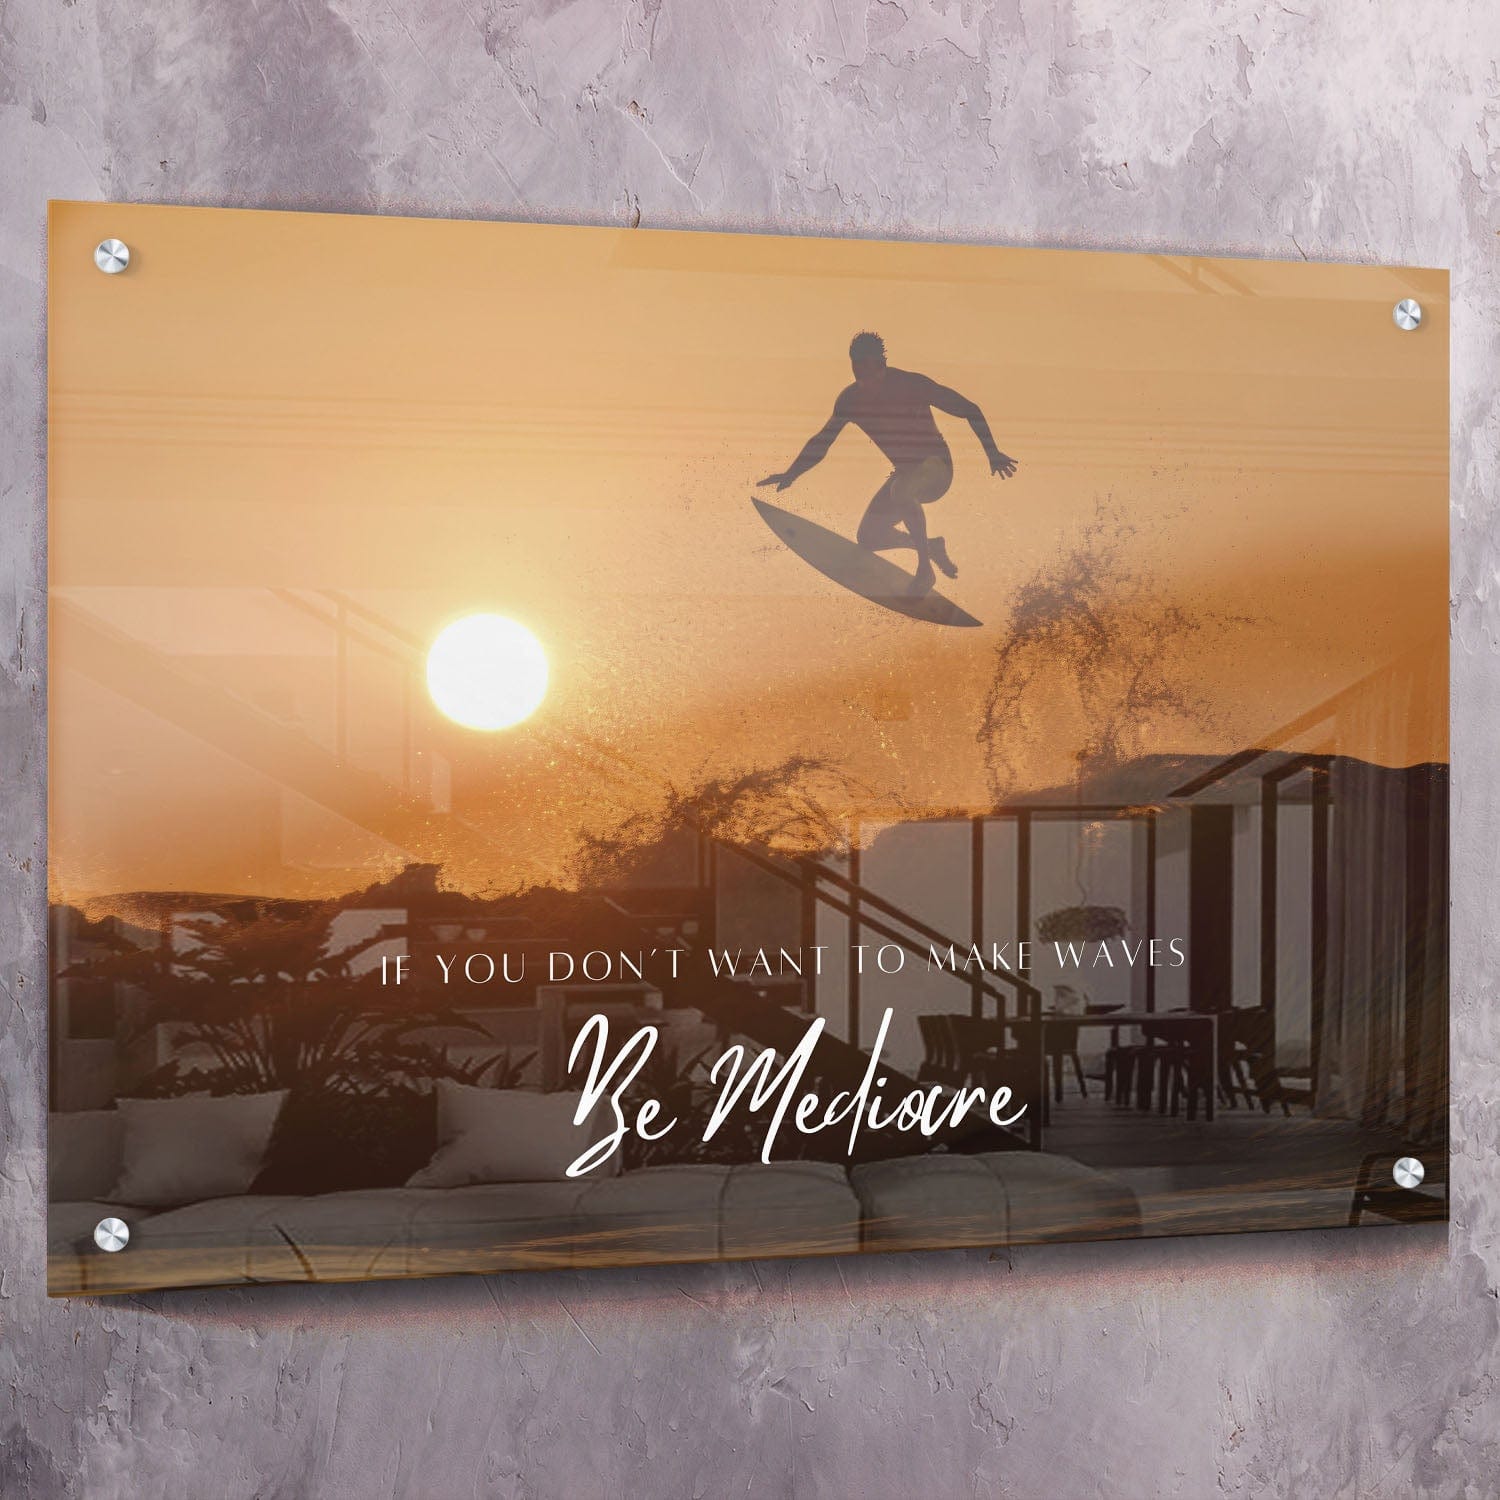 If You Don’t Want to Make Waves Be Mediocre - TD Jakes Quote Wall Art | Inspirational Wall Art Motivational Wall Art Quotes Office Art | ImpaktMaker Exclusive Canvas Art Landscape